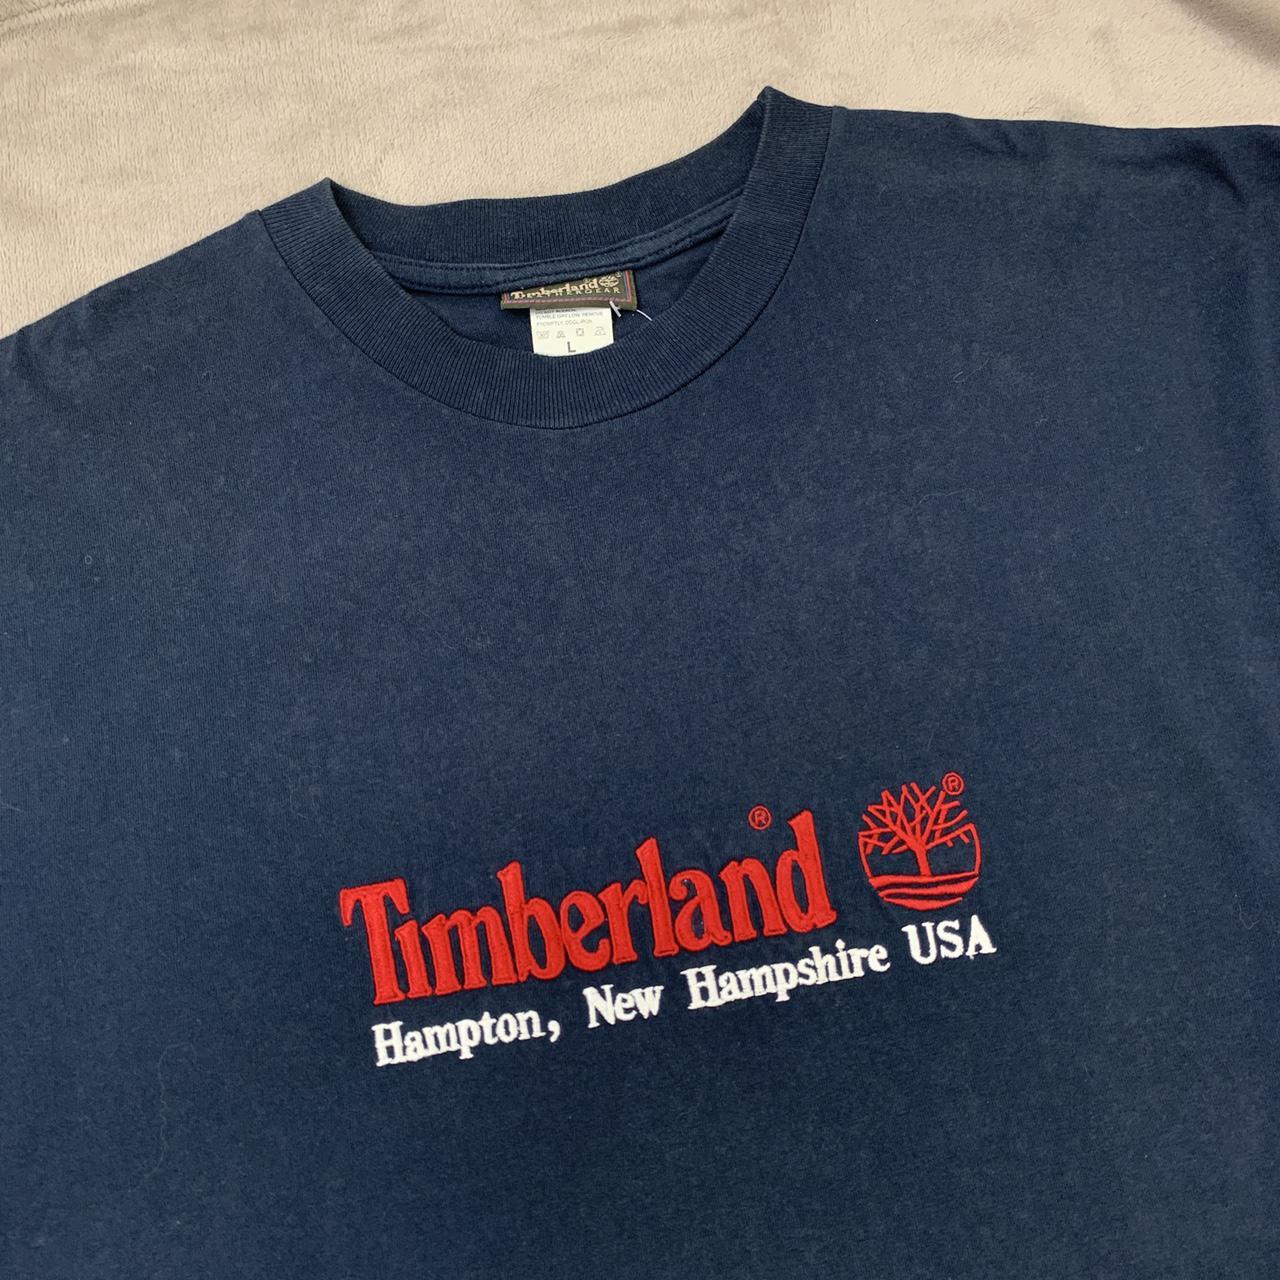 Product Image 3 - Vintage Timberland t shirt

Has faint